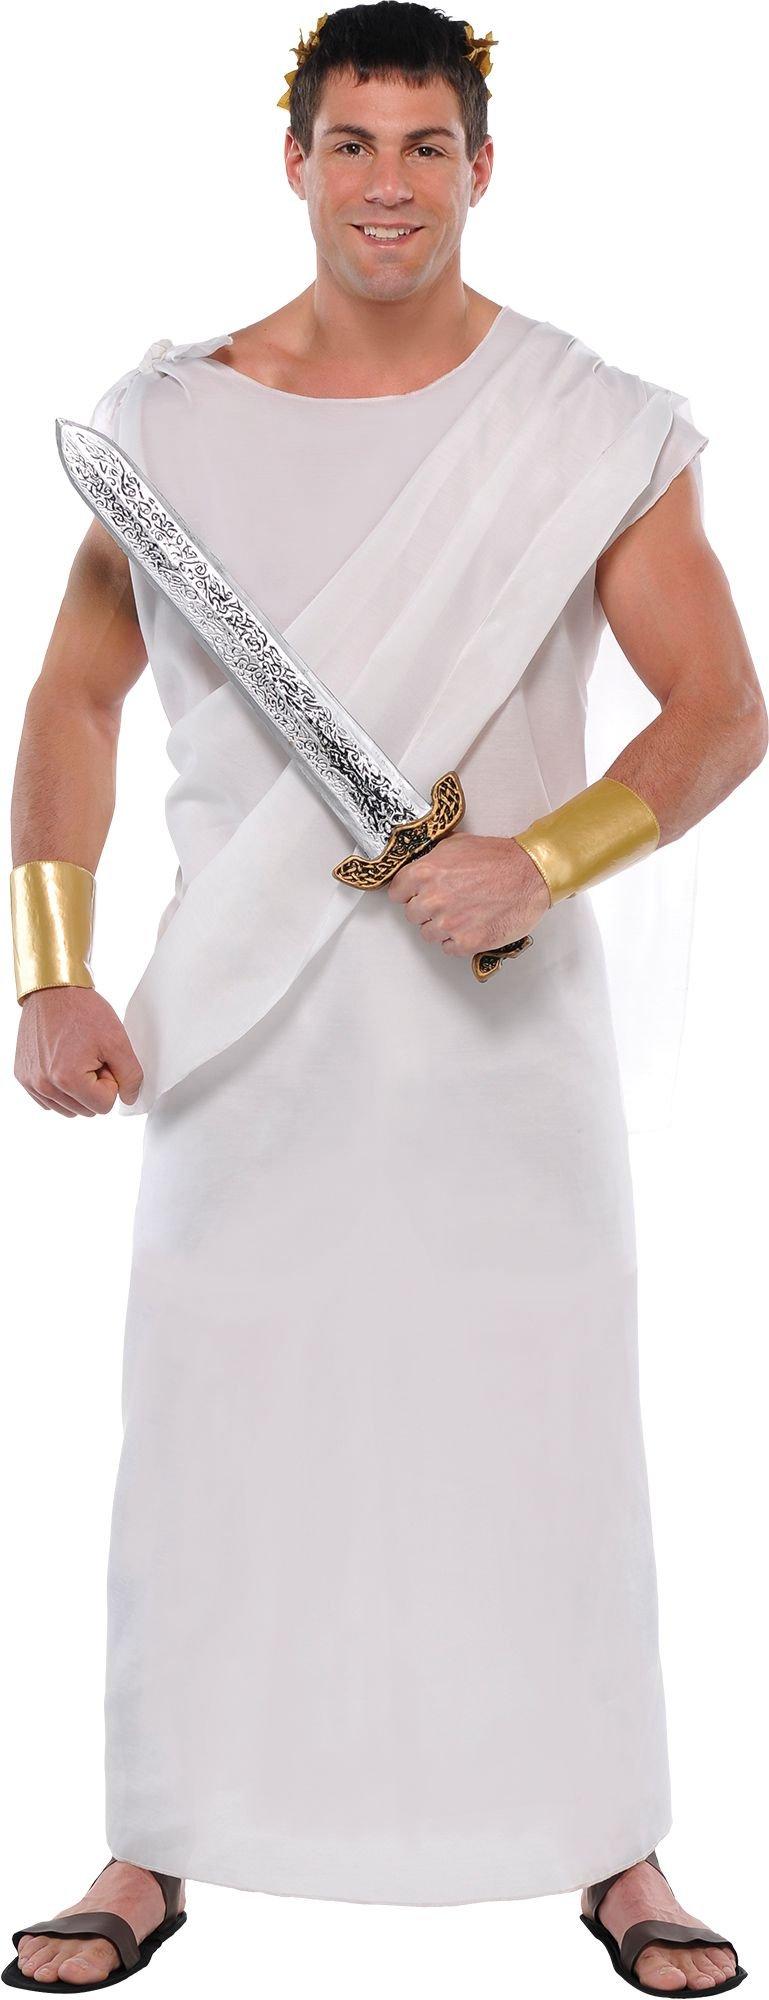 Adult Toga Costume | Party City